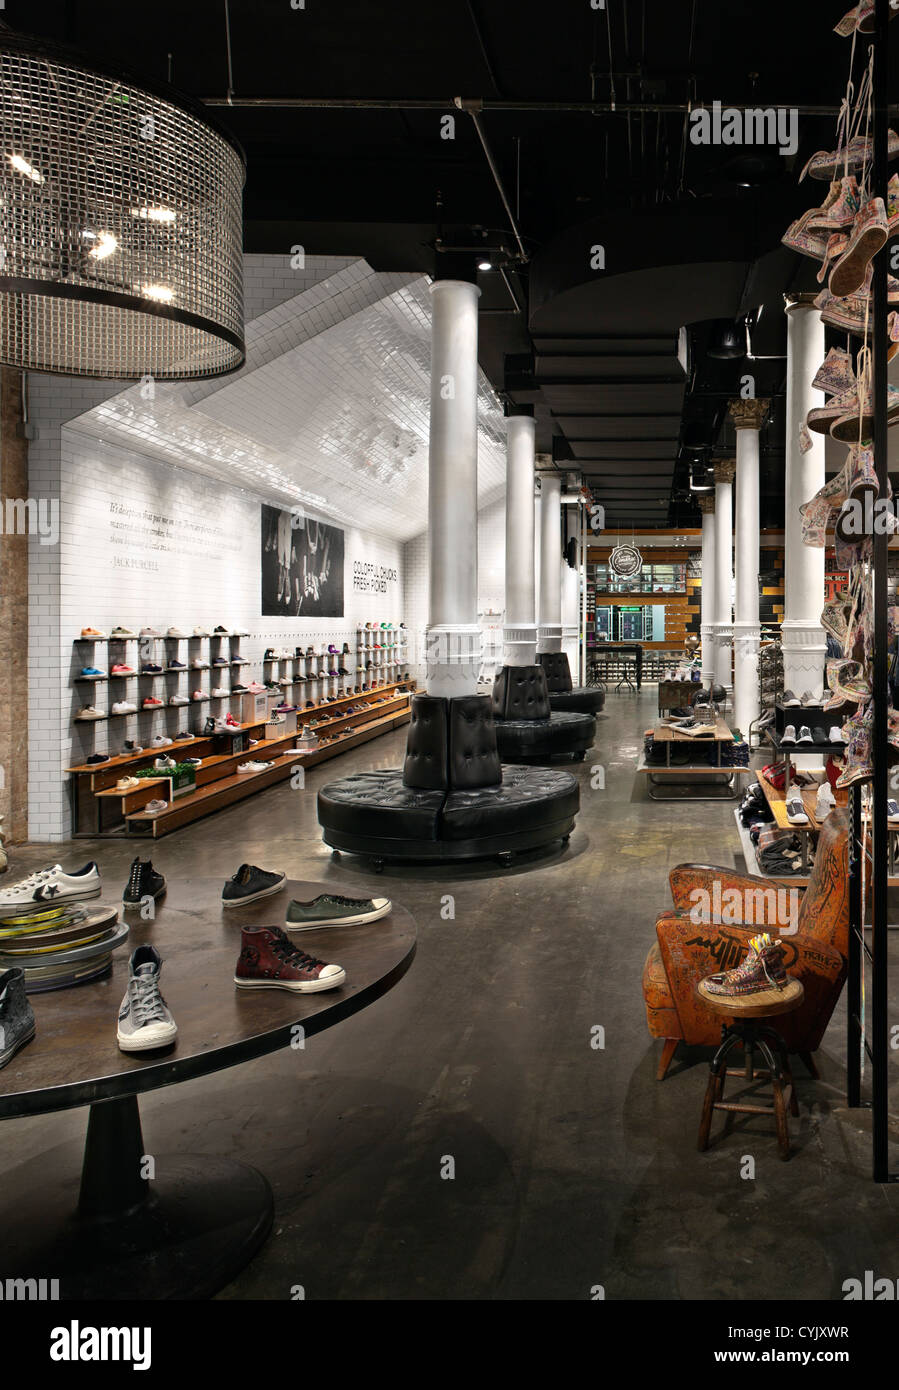 converse flagship store new york